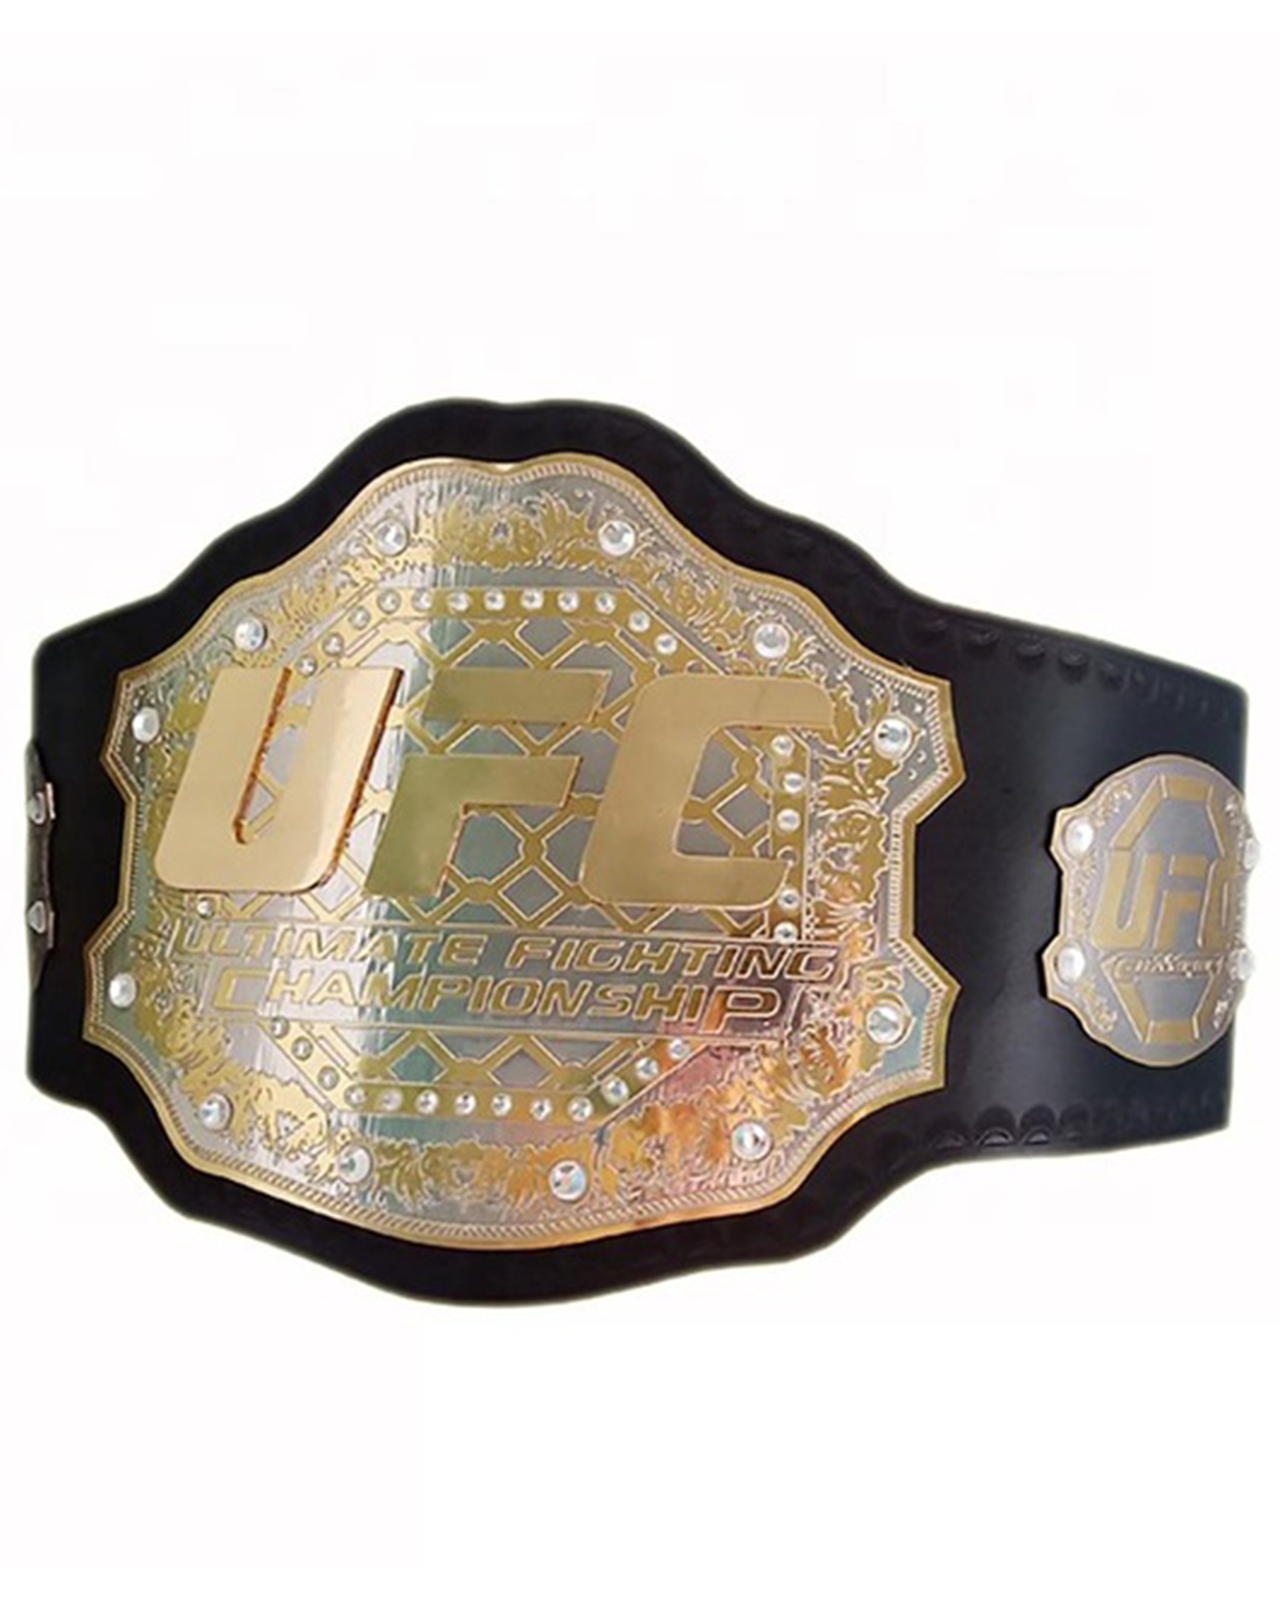 UFC Ultimate Champion Ship Leather Belt Replica Adult Size 